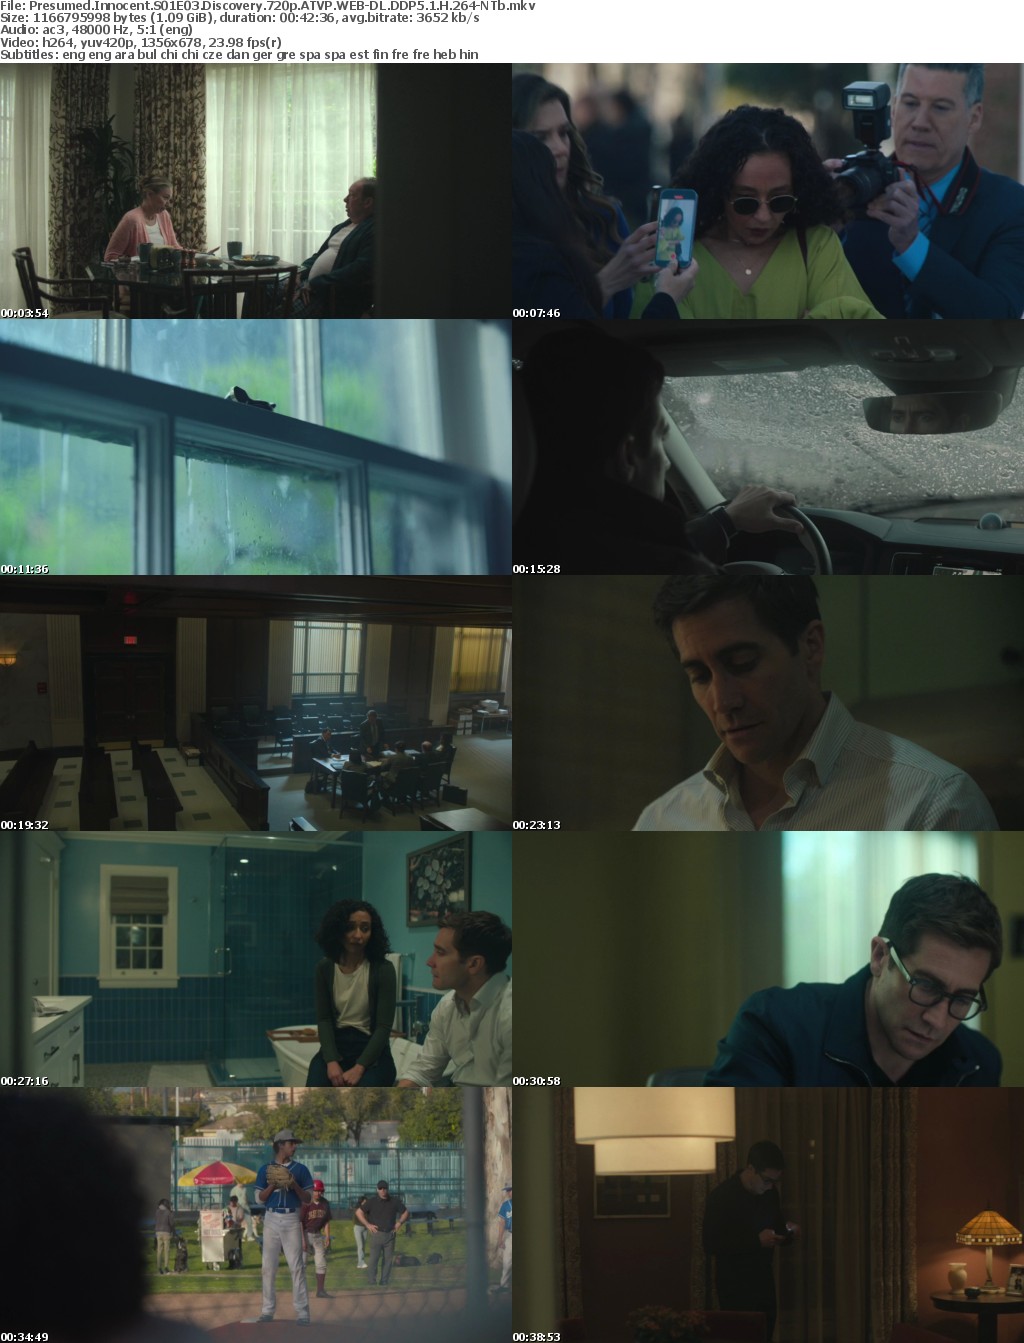 Presumed Innocent S01E03 Discovery 720p ATVP WEB-DL DDP5 1 H 264-NTb